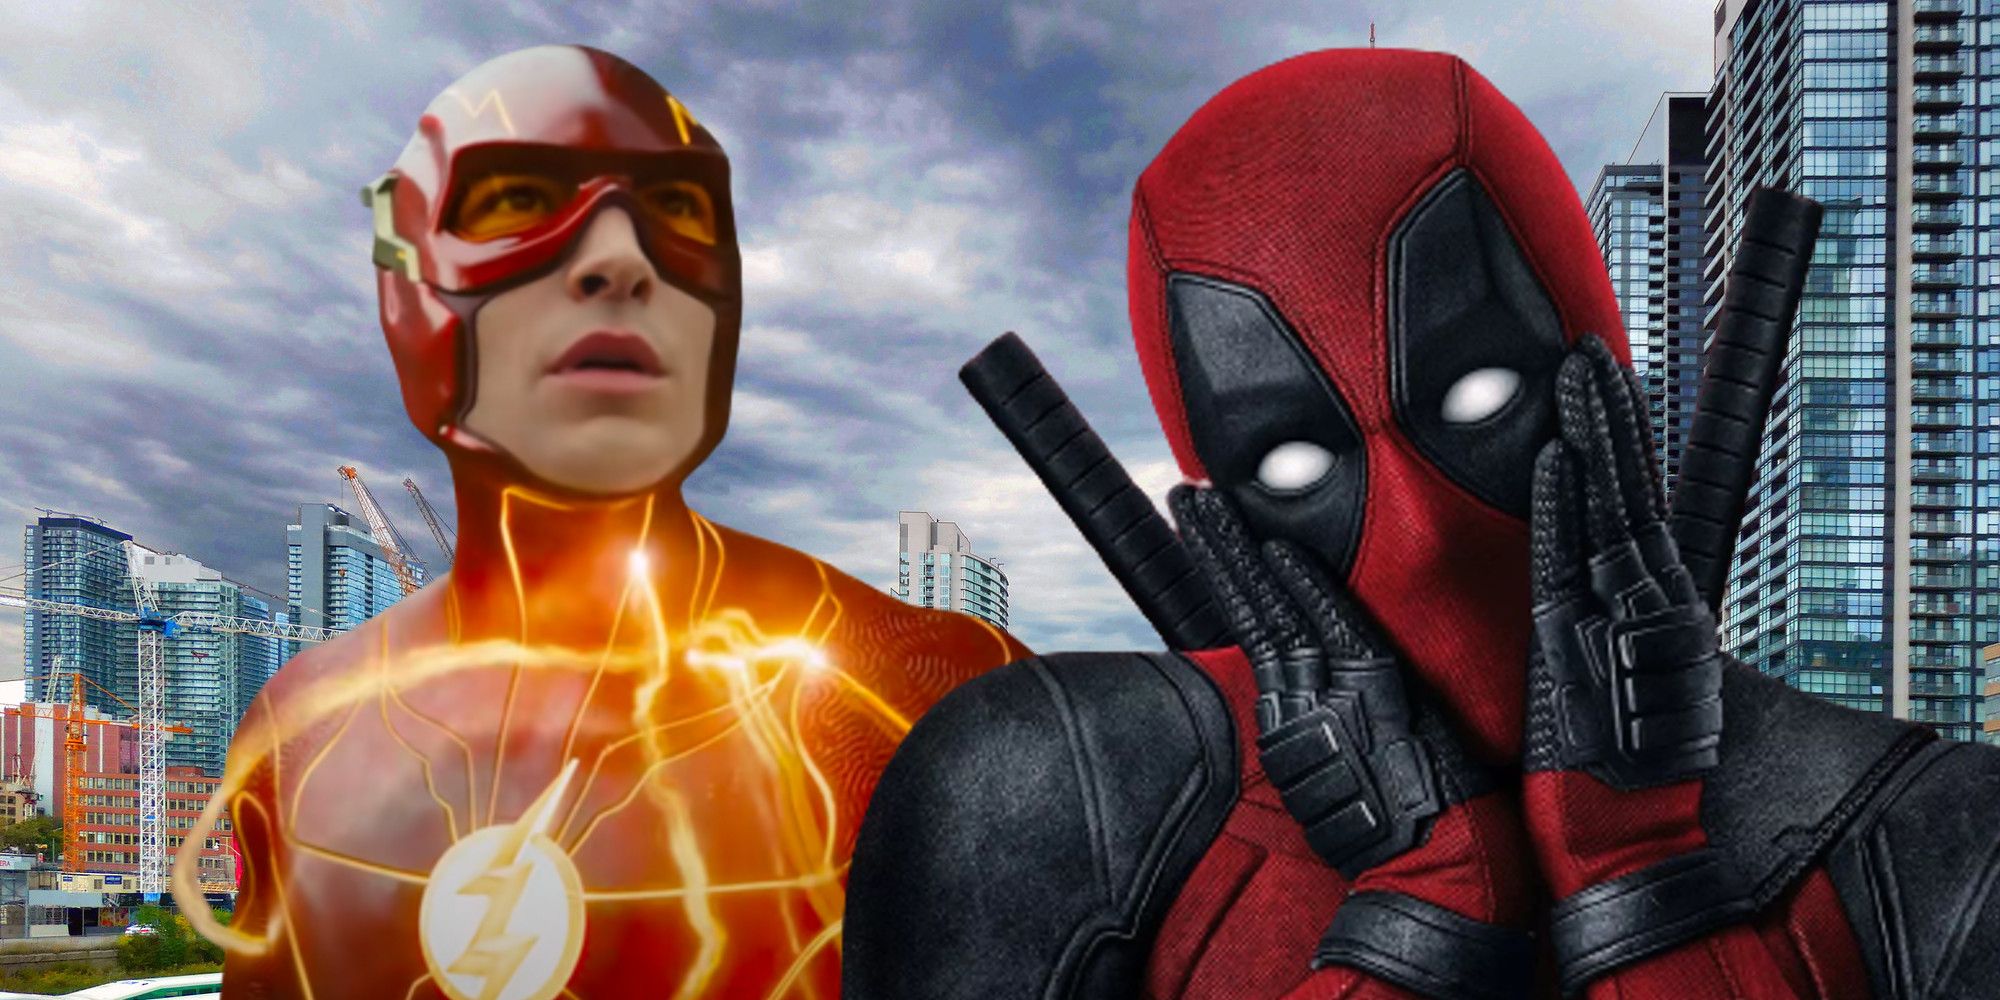 Deadpool and The Flash